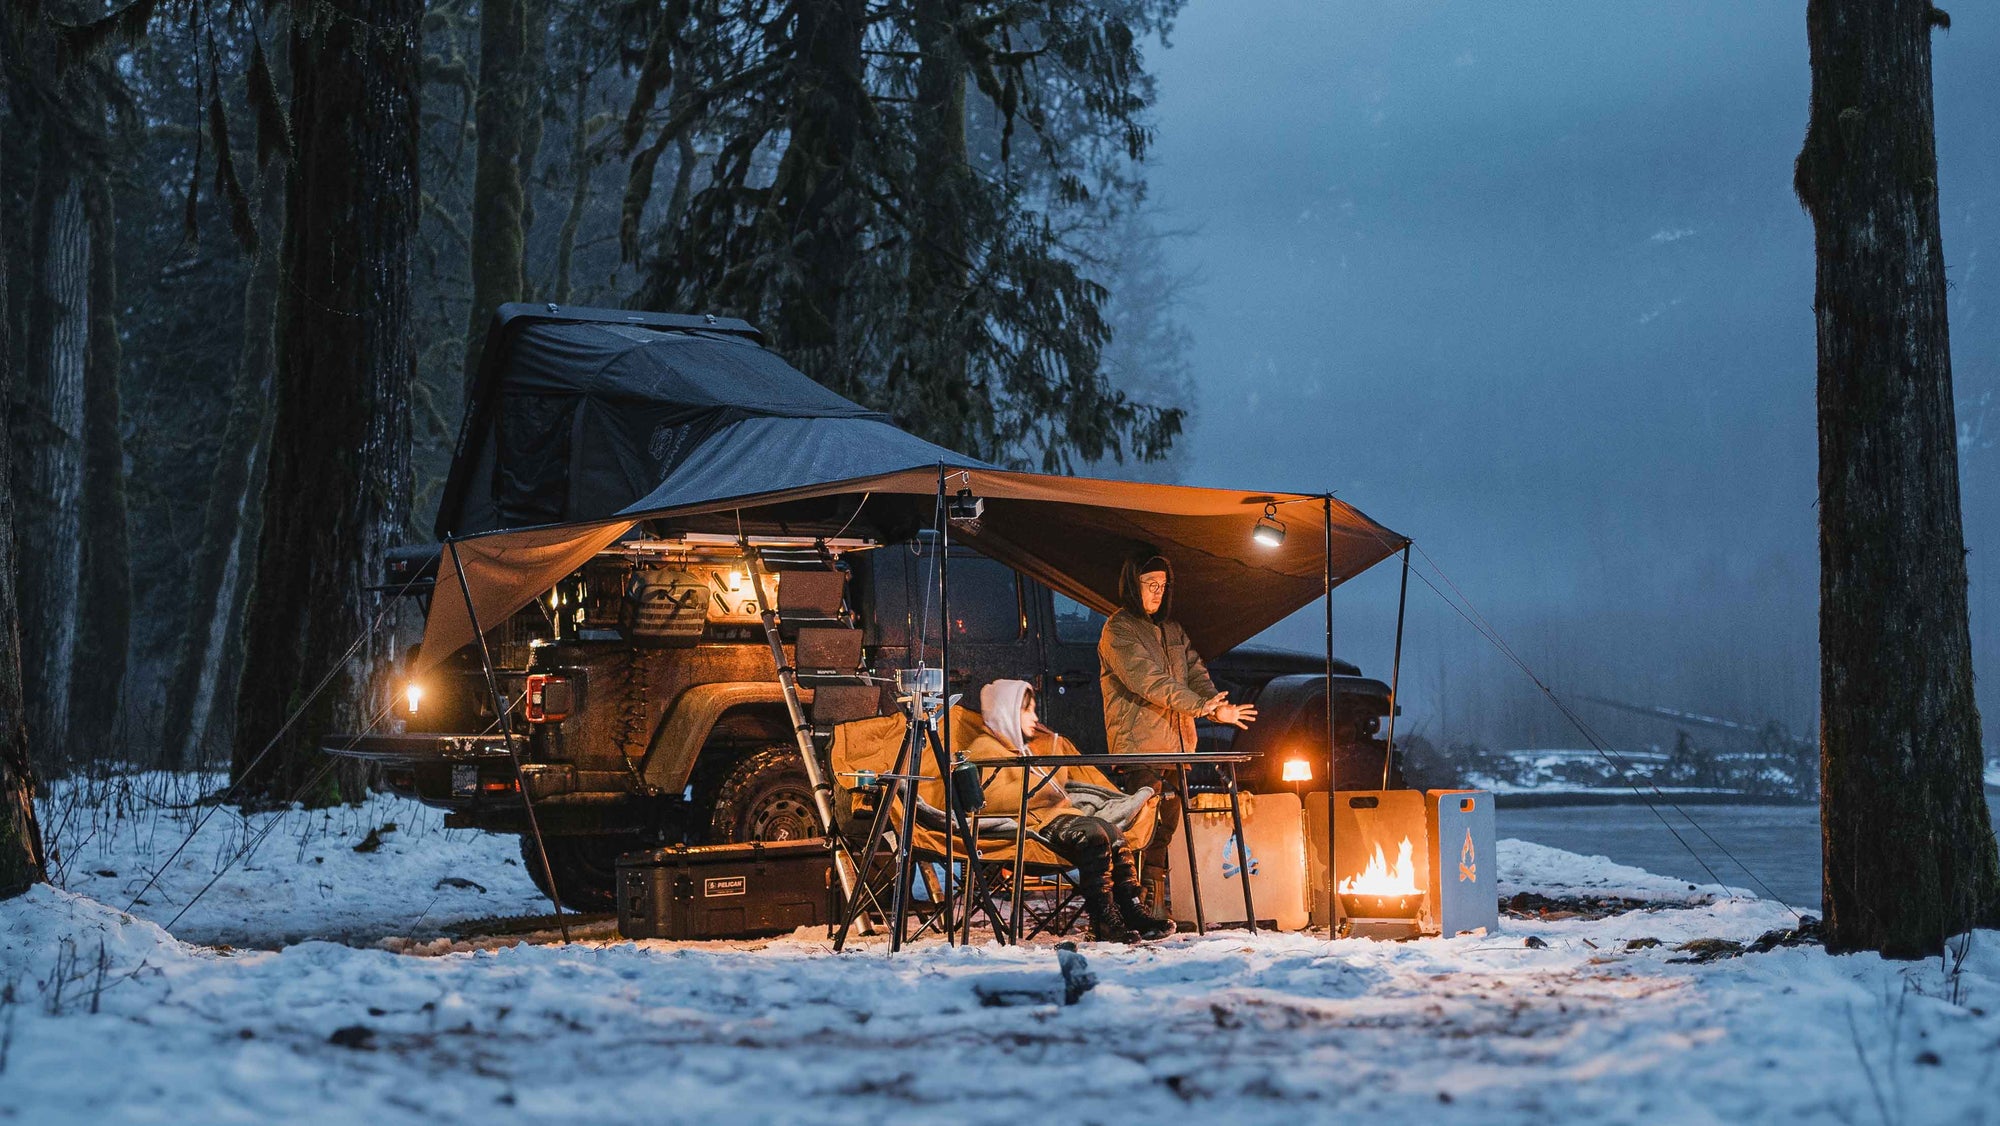 Ep. 18: Rainy & Foggy Winter Camping Vibes - Cozy Escape into Nature